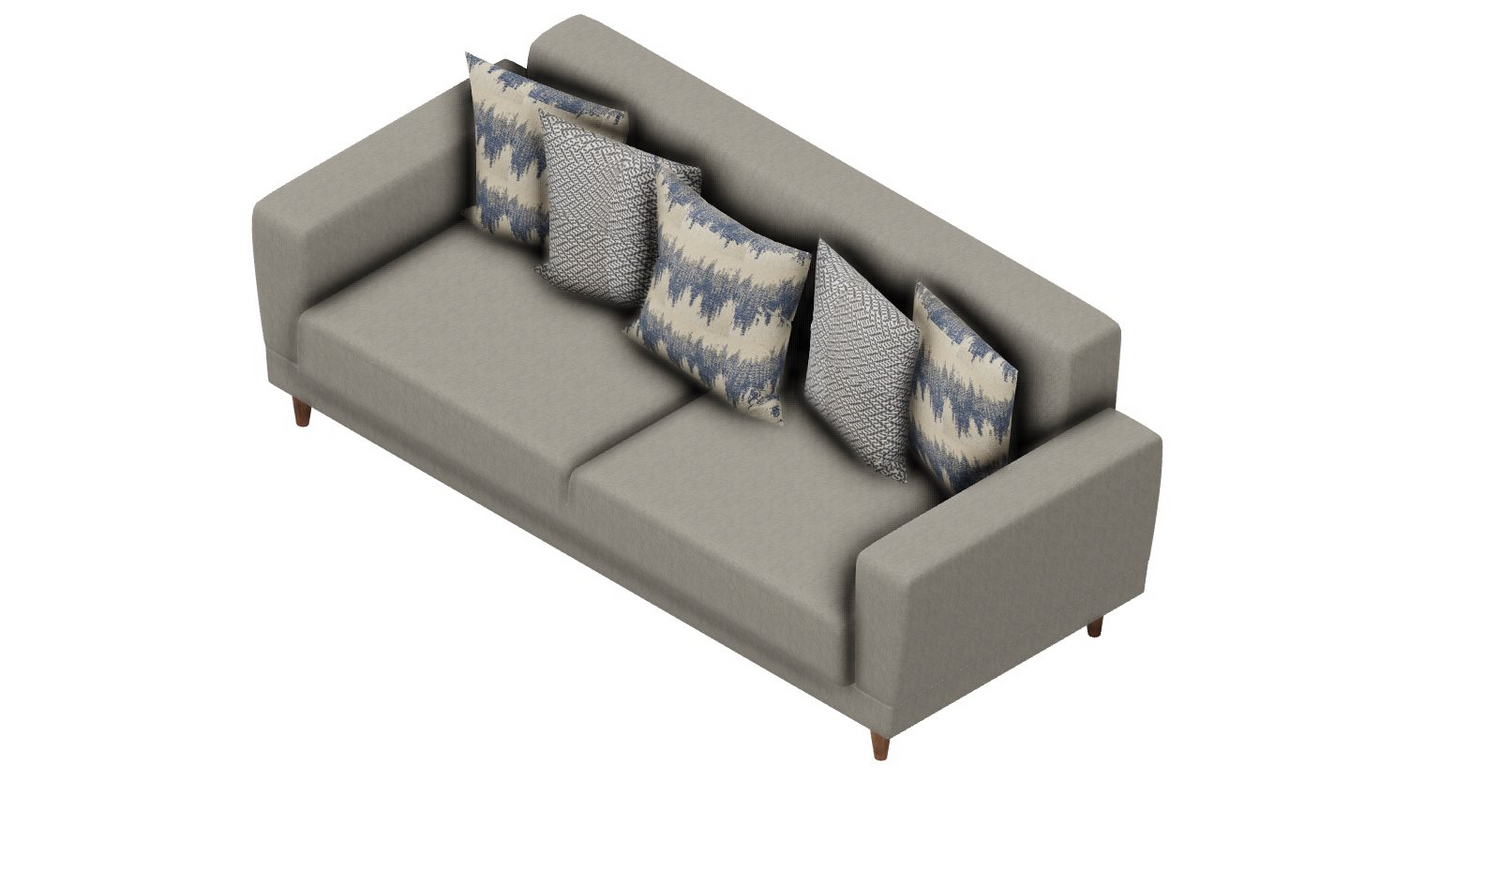 Dolce Padua Cream/Blue 3-Seater Sofa Bed - DOLCE 03.302.0472.5054.0101.4682.1